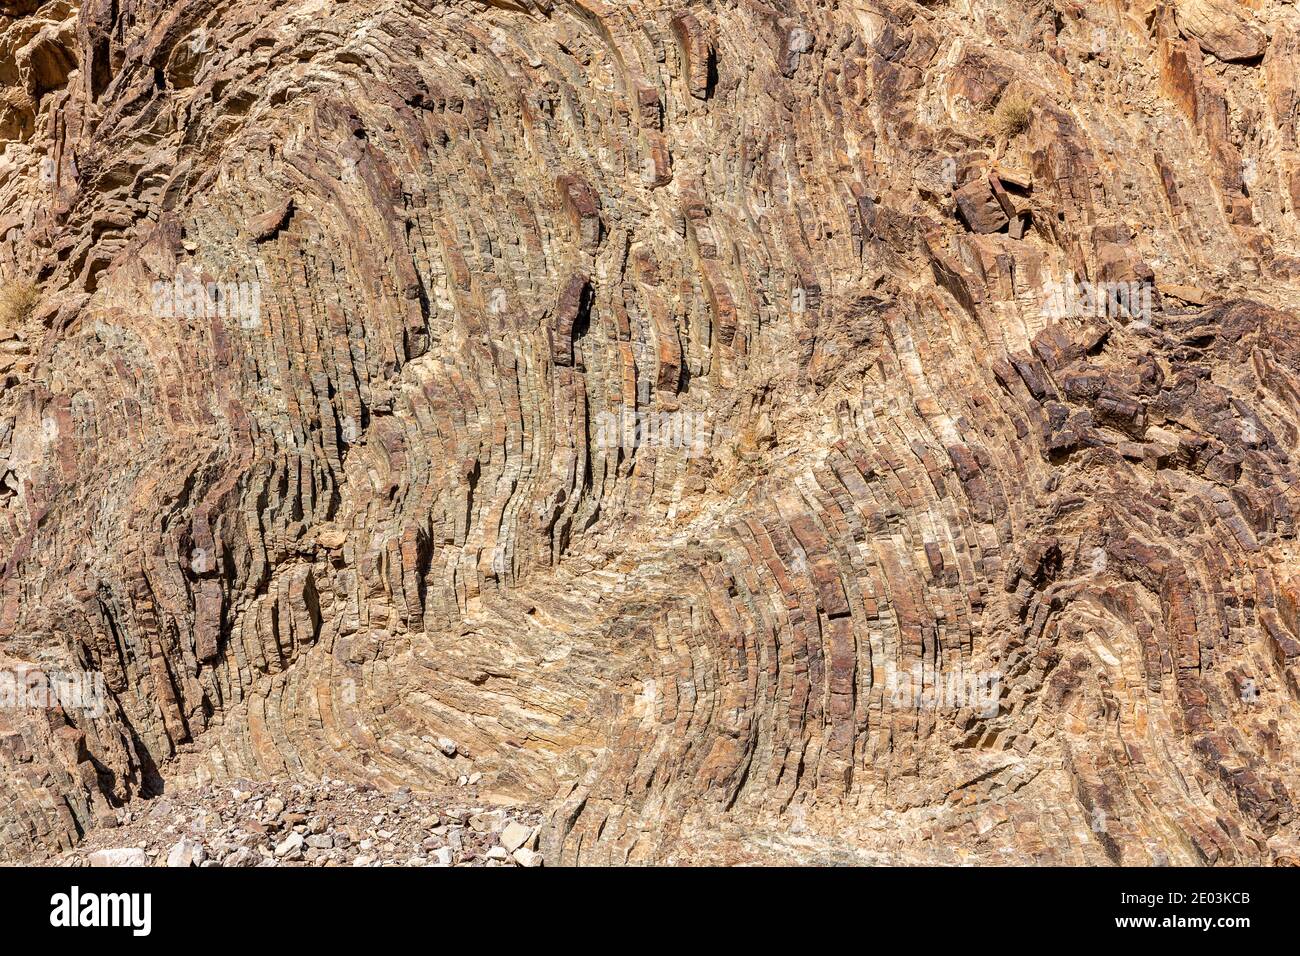 Limestone and dolomite rock texture with layers close-up, Hajar Mountains, United Arab Emirates. Stock Photo